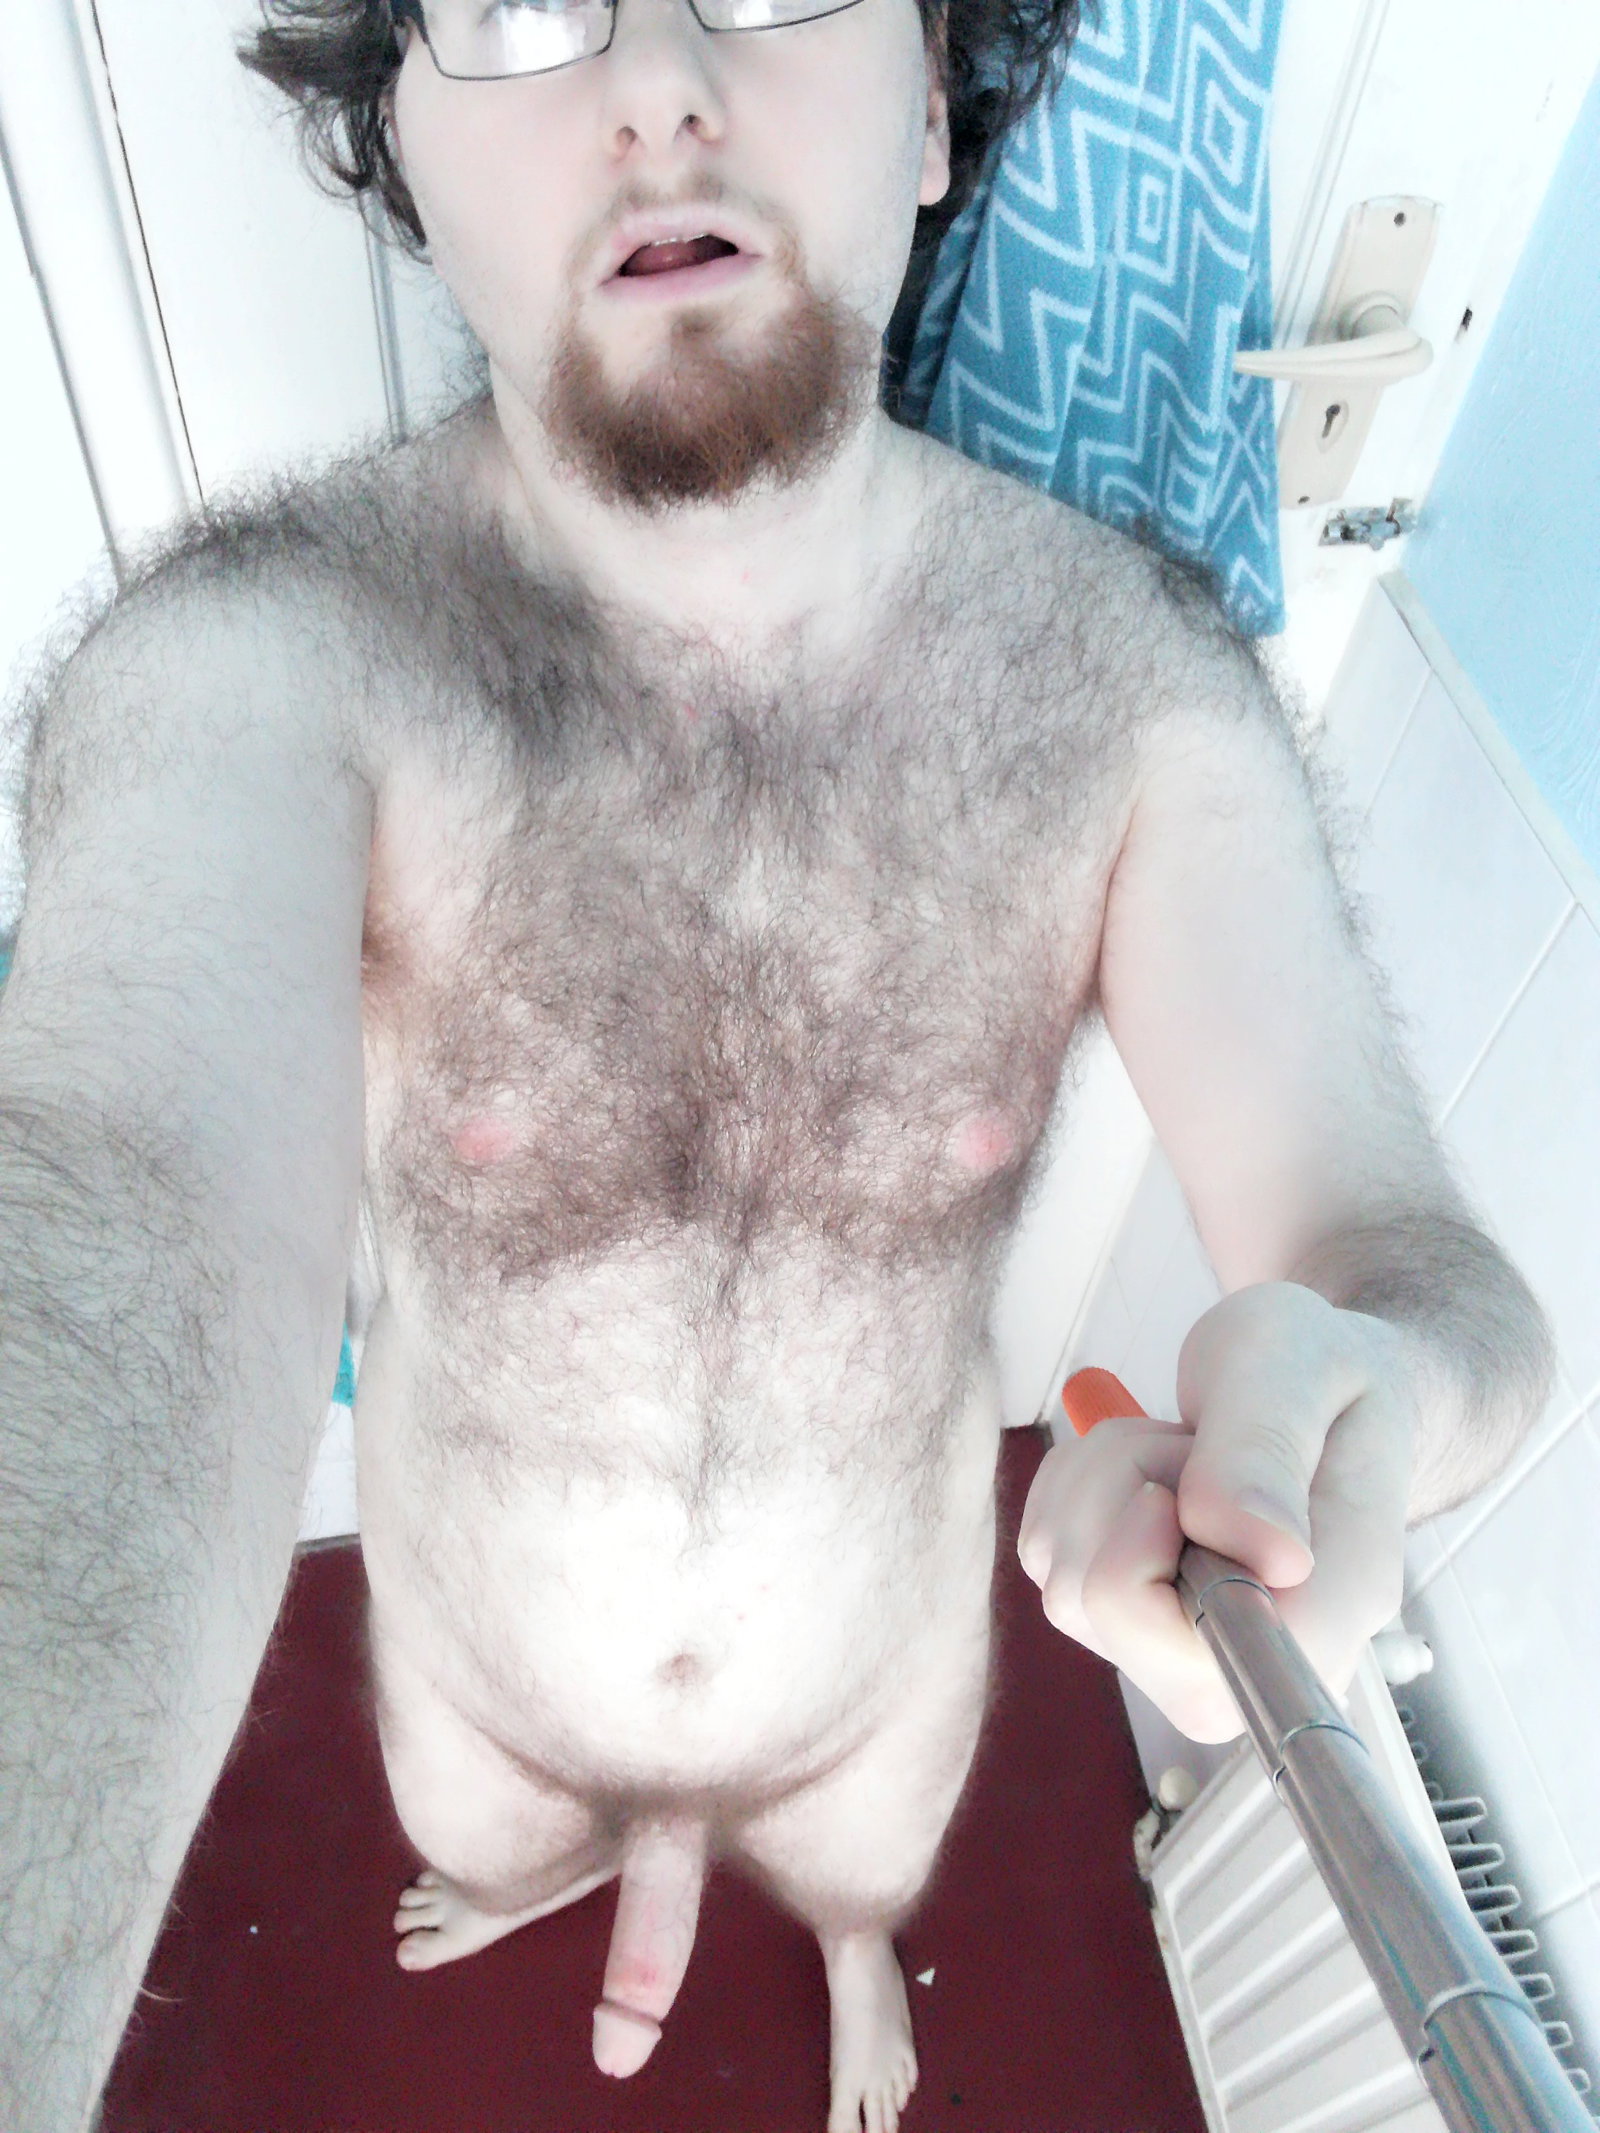 Photo by CatBoi with the username @CatBoi, who is a verified user,  January 5, 2019 at 3:57 PM and the text says '#naked #nude #amateur #hairy #selfie #bathroom #me'